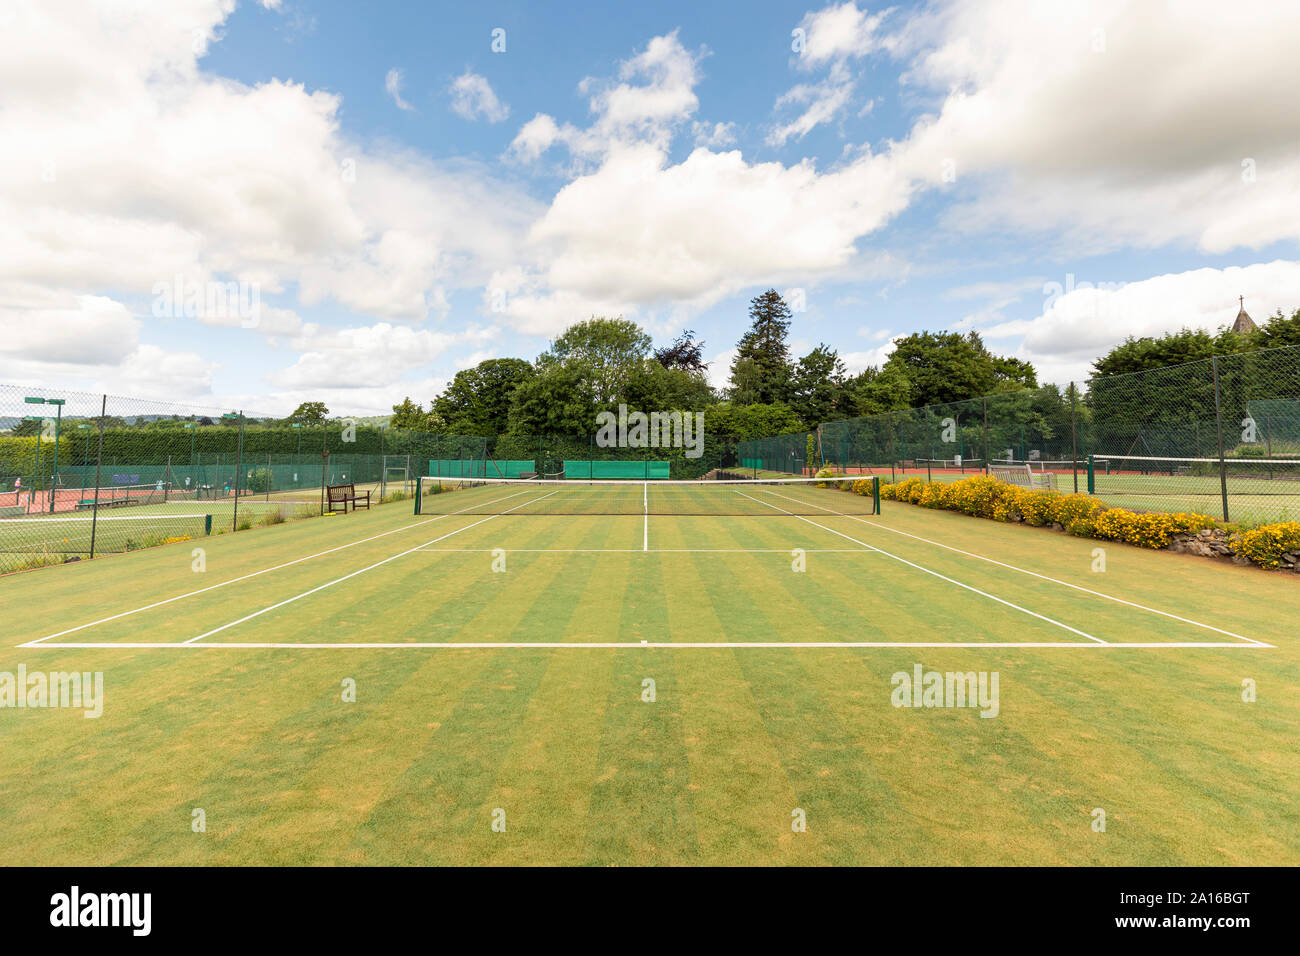 Sports net and single line markings in empty tennis court against sky Stock Photo